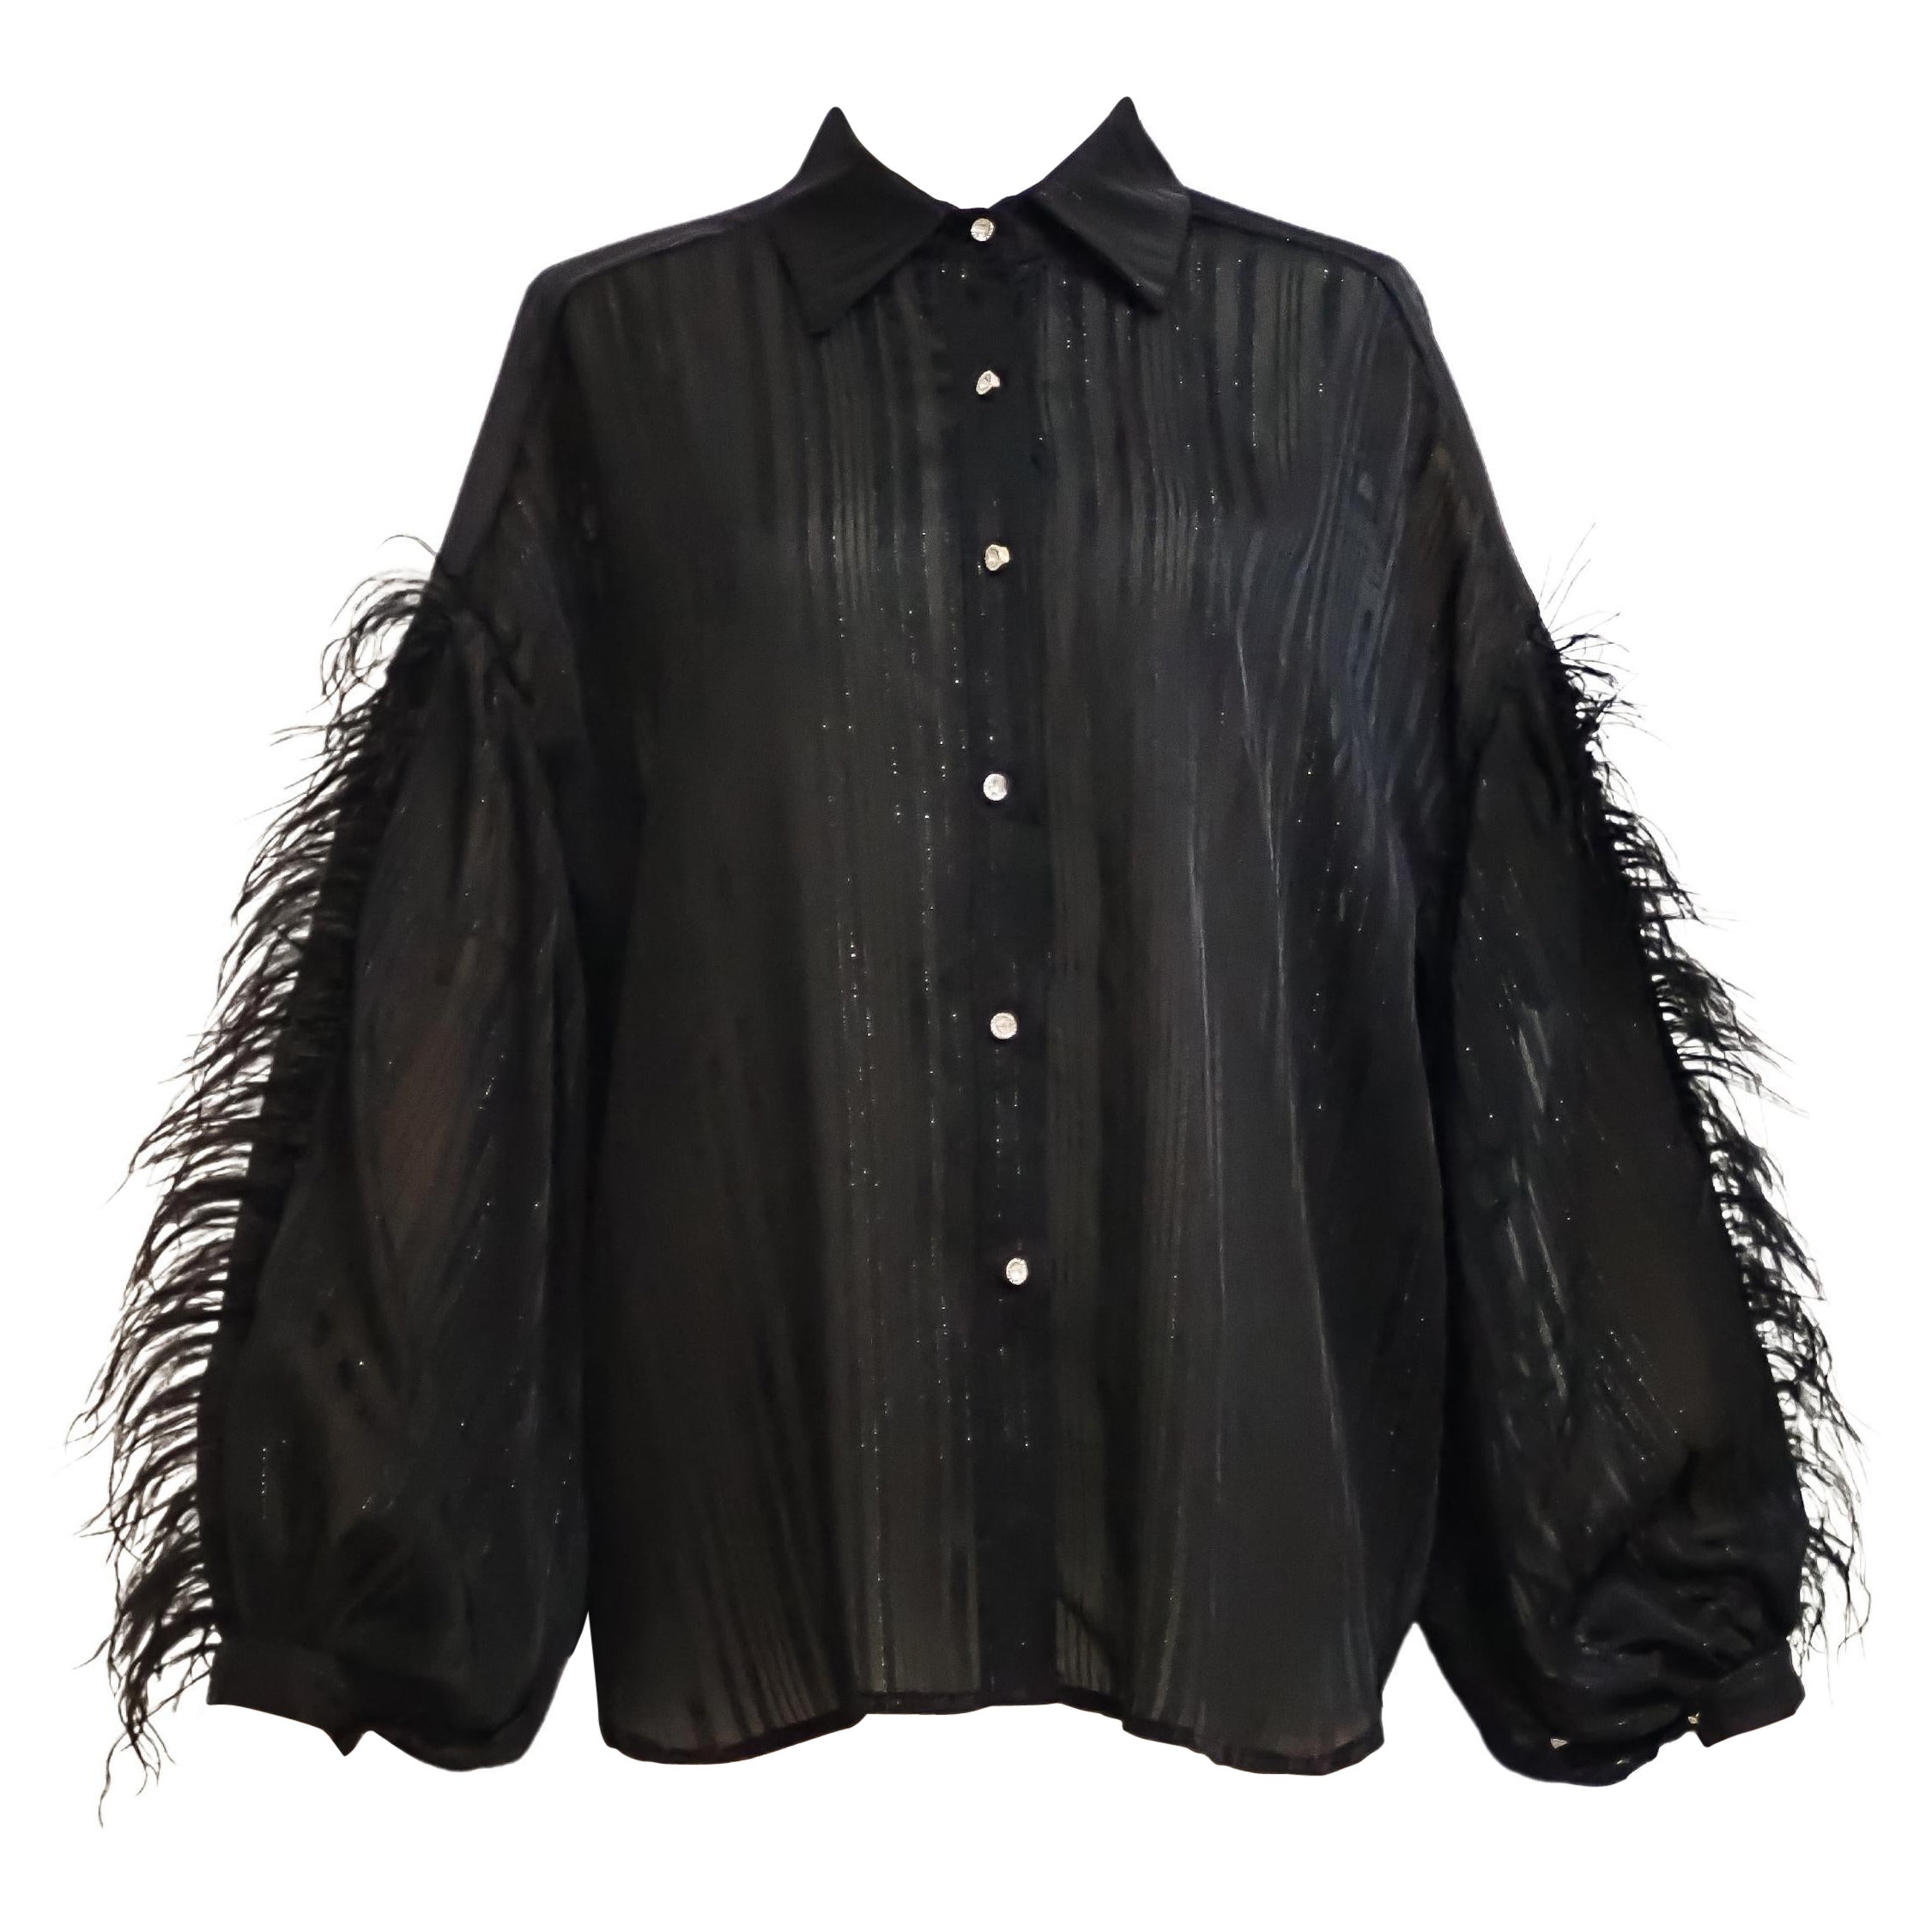 Black vintage shirt with feathers For Sale